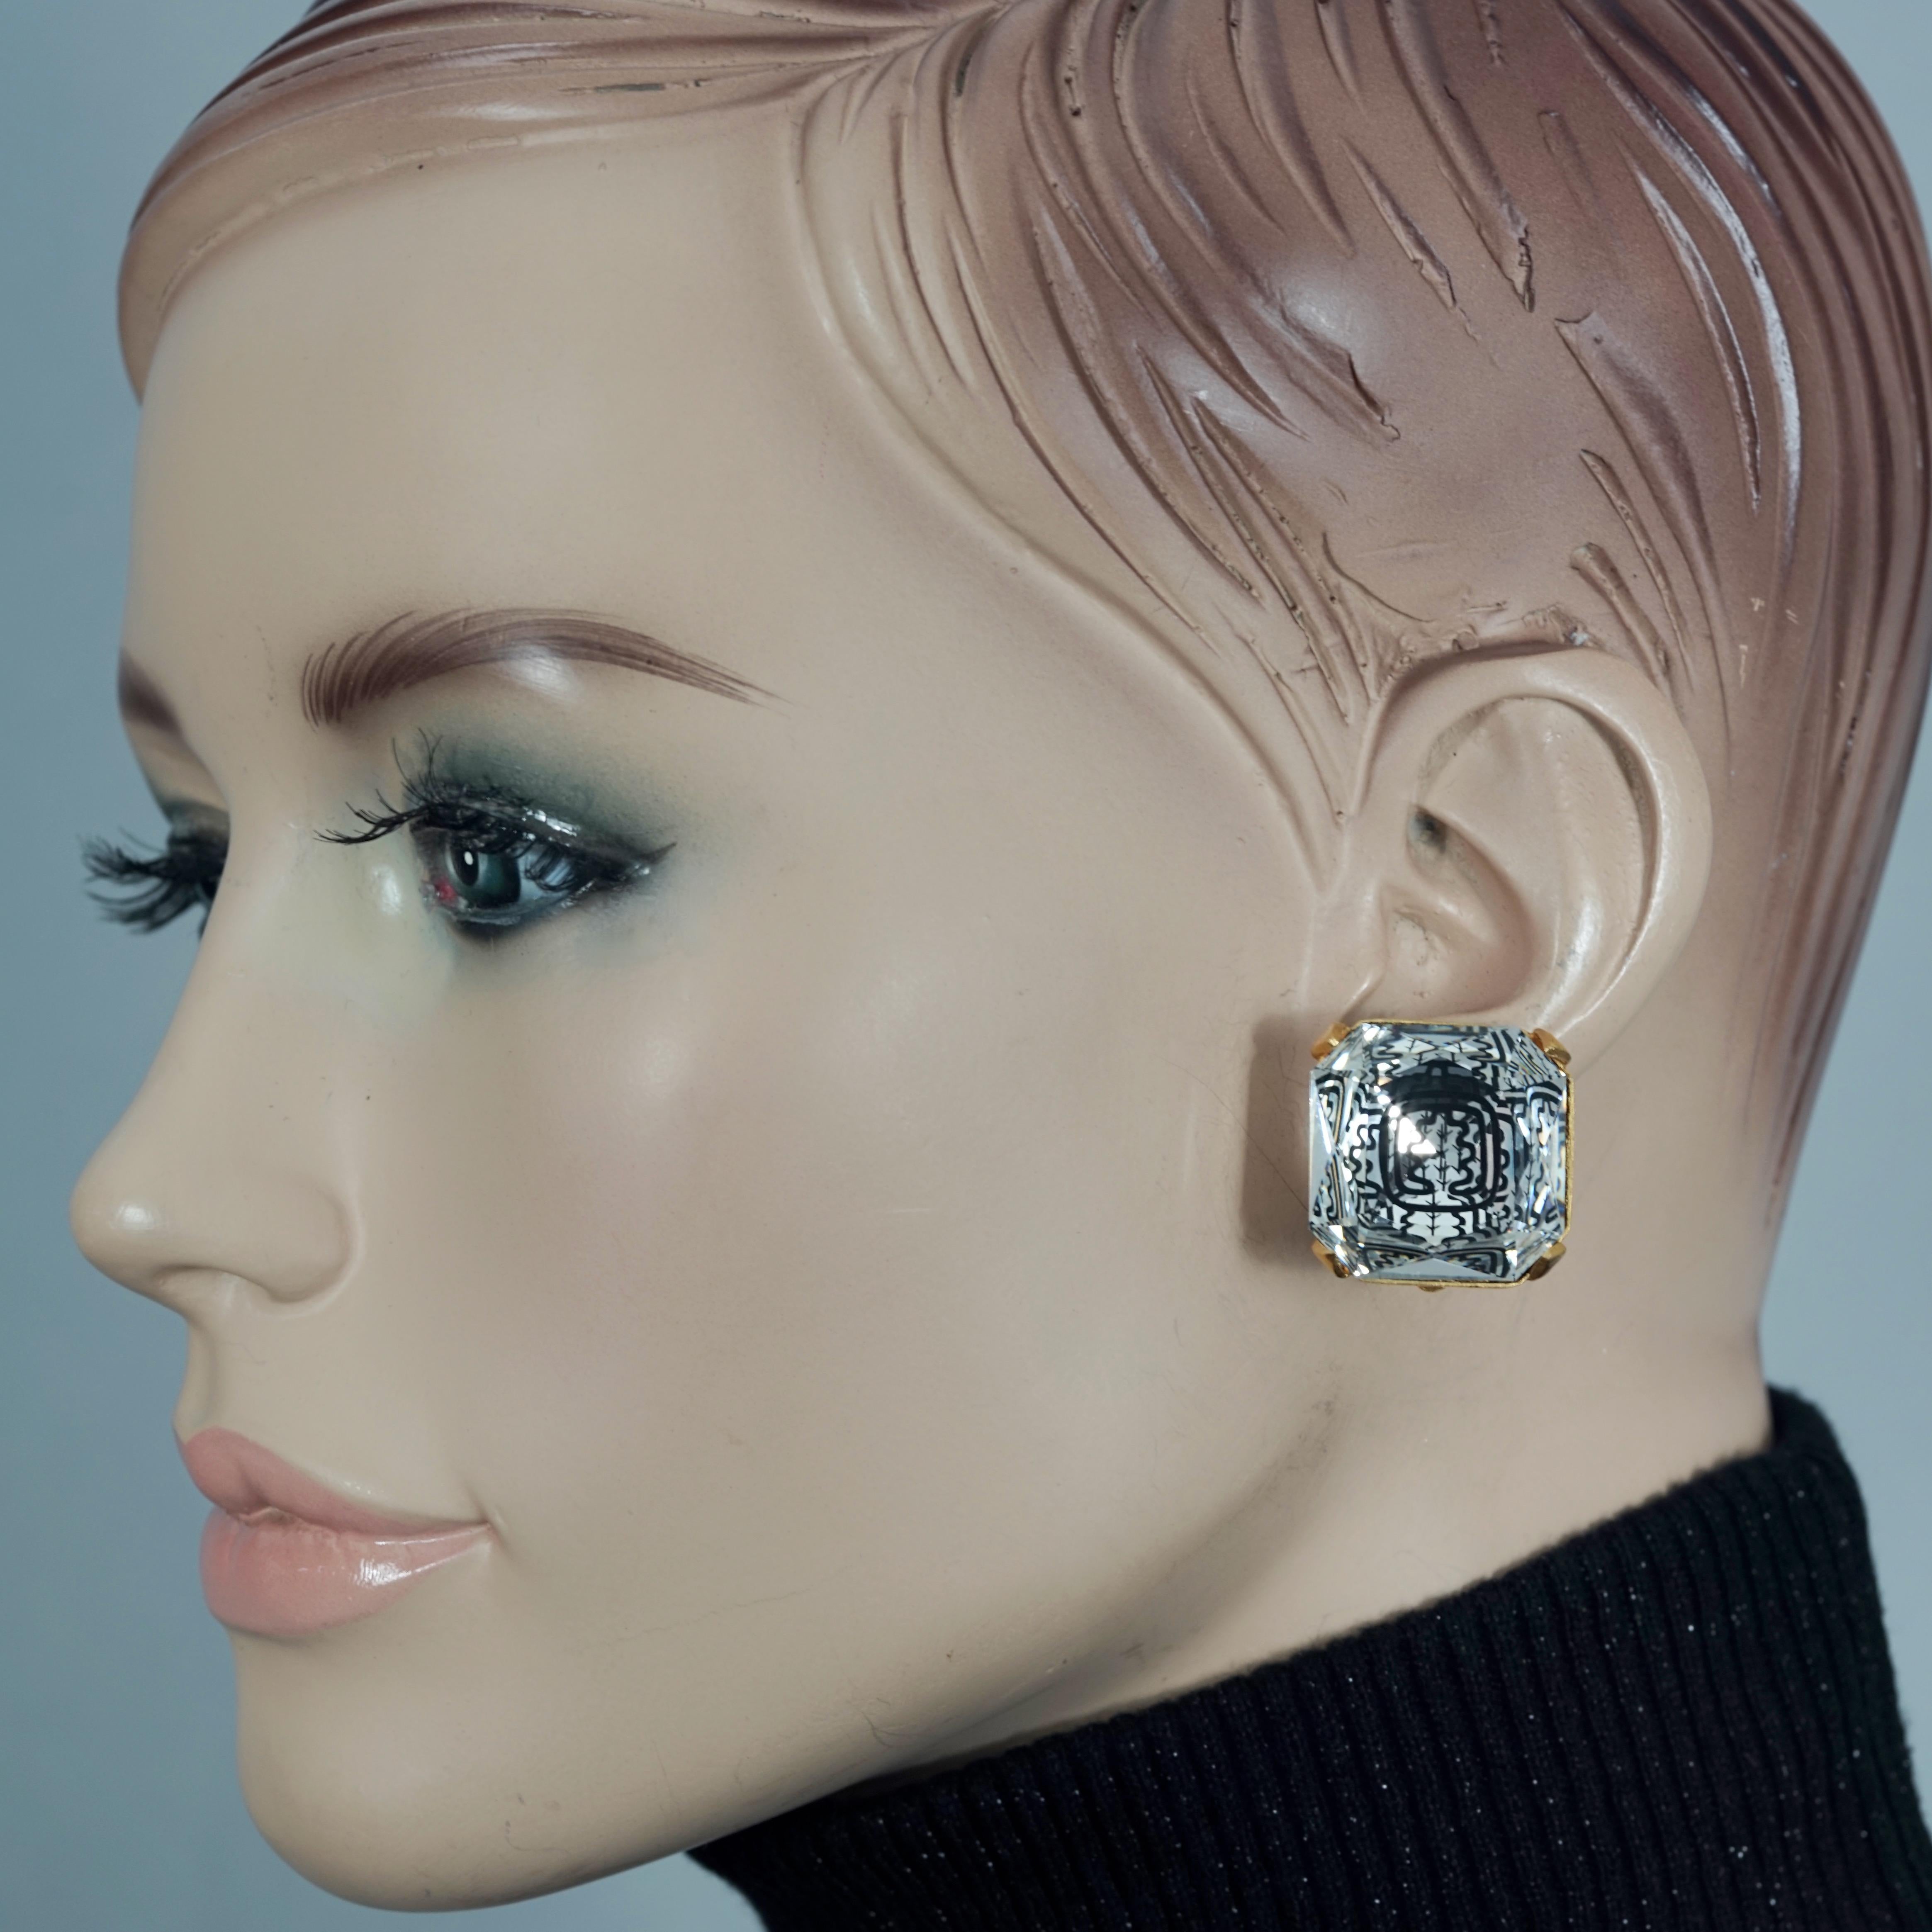 Vintage INES de la FRESSANGE Iconic Oak Leaf Crystal Earrings

Measurements:
Height: 0.94 inch (2.4 cm)
Width: 0.94 inch (2.4 cm)
Weight per Earring: 16 grams

FEATURES:
- 100% Authentic INES de la FRESSANGE.
- Faceted crystal earrings with iconic